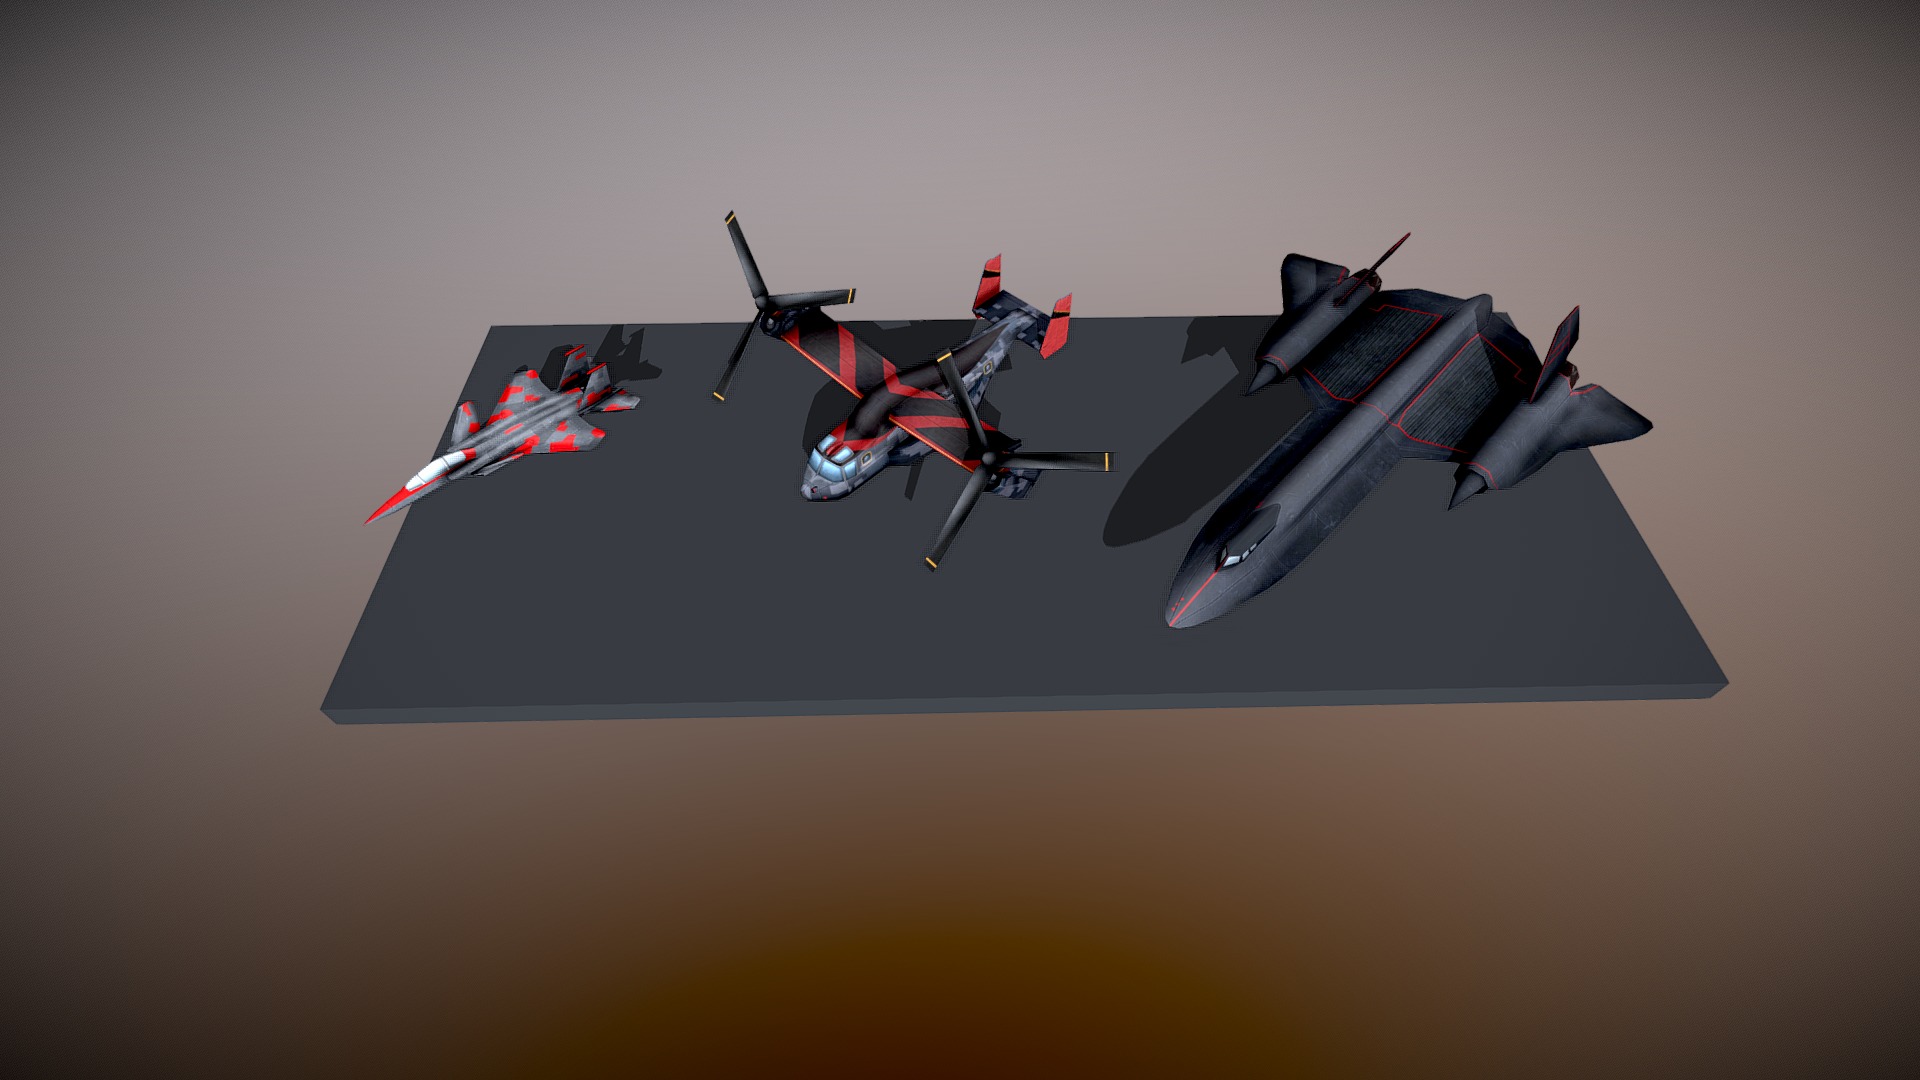 A series of planes I made for Vasco Games as an intern.
modeled using 3DsMax and textured with Photoshop. Created for a mobile game 3d model